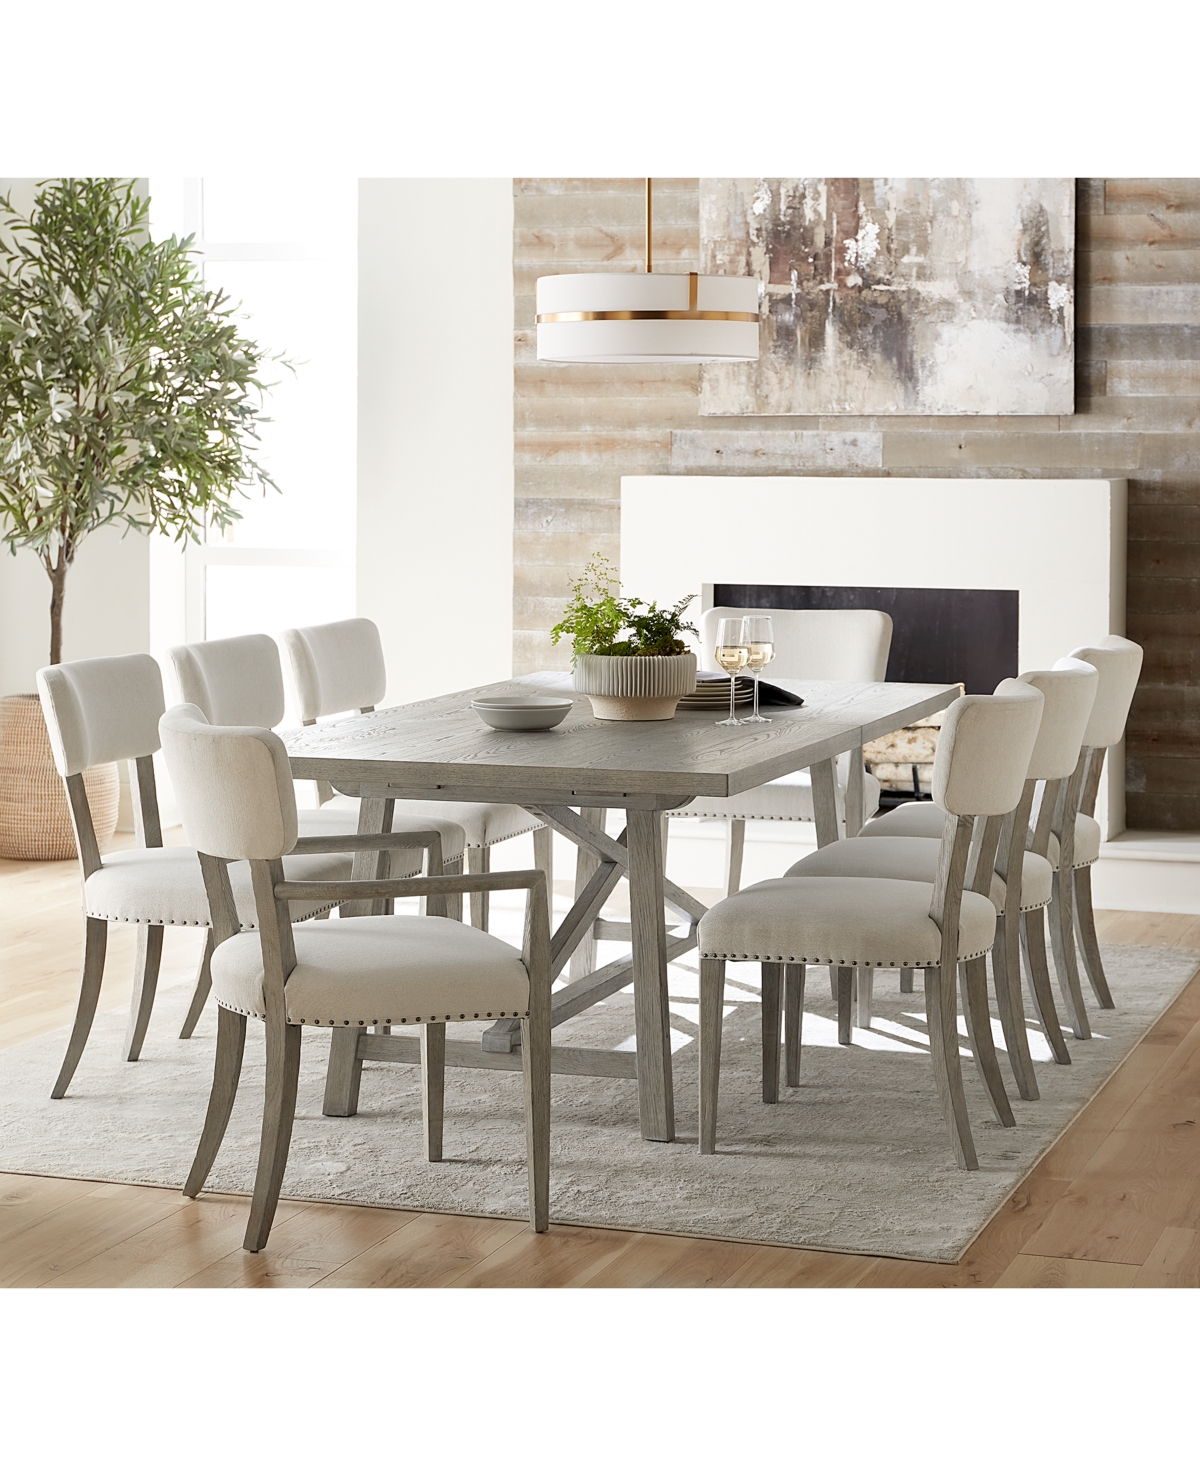 Albion 9-pc. Dining Set (Table, 6 Side Chairs, and 2 Arm Chairs)